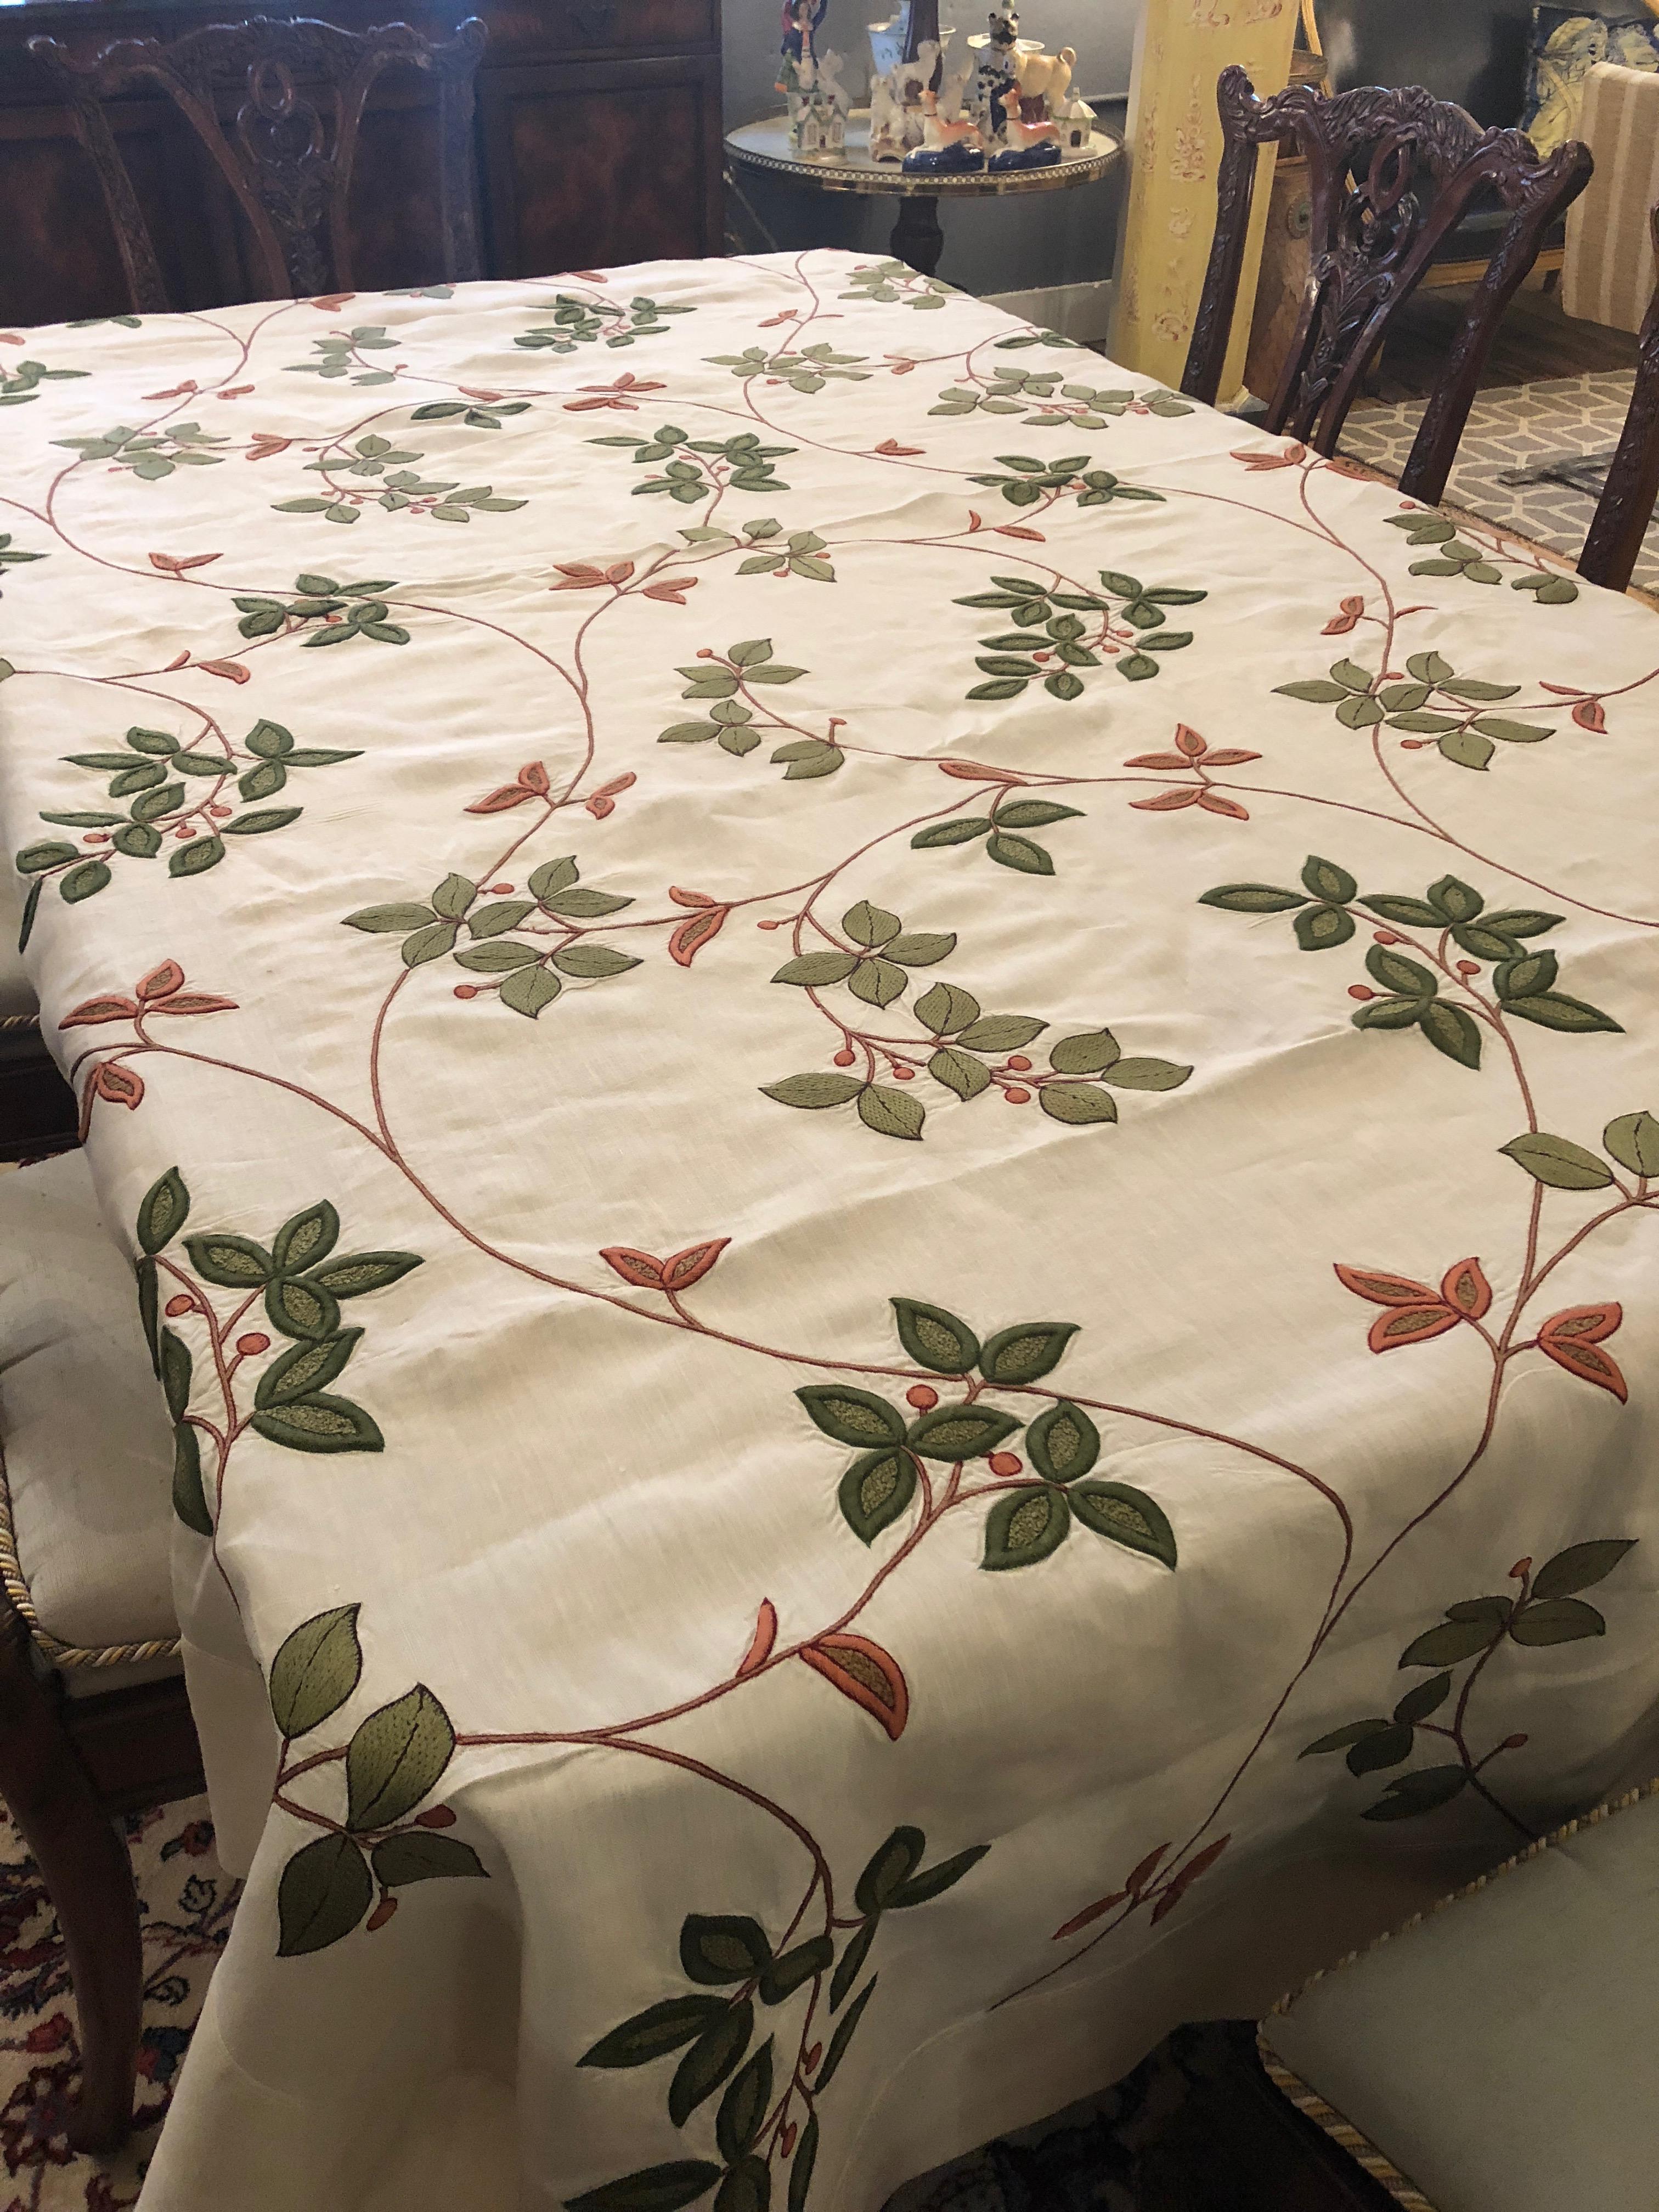 Lovely large cream colored linen tablecloth having green and terracotta leaves and flowers embroidered on it.